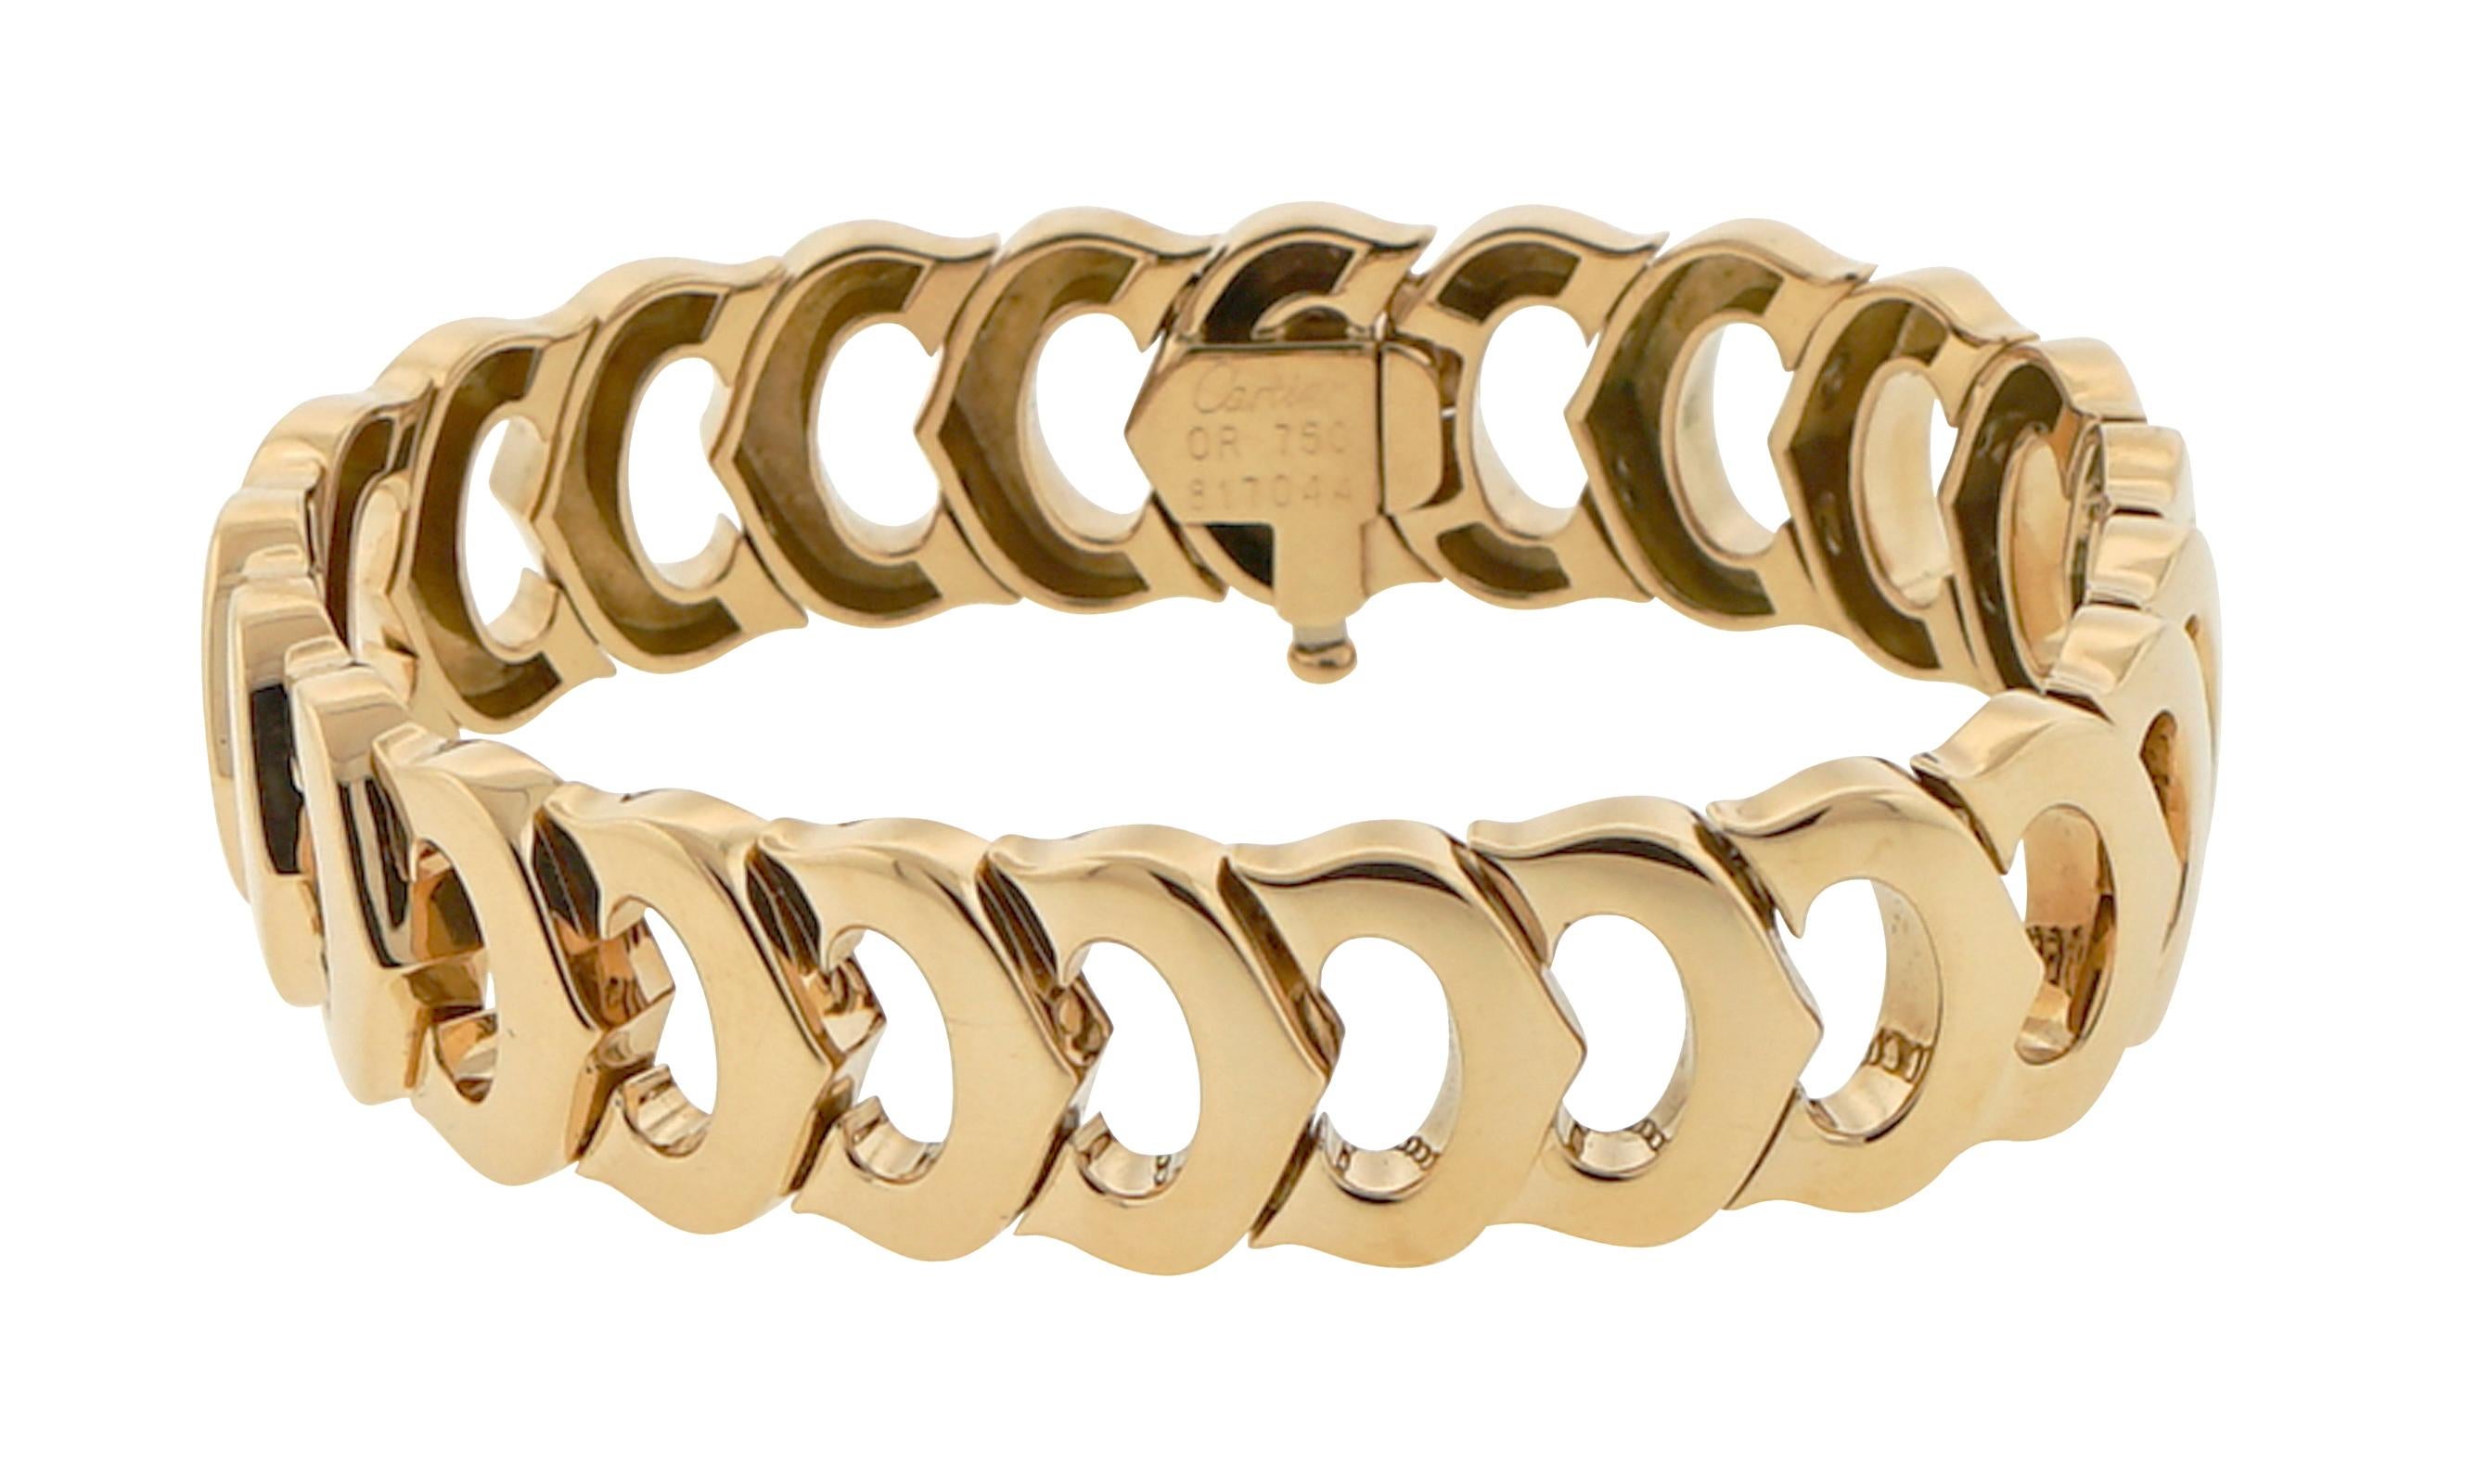 The bracelet is 7 inches in length, made of 18K yellow gold, and weighs 31.00 DWT (approx. 48.21 grams). Beautiful condition. This is the wider of the two sizes